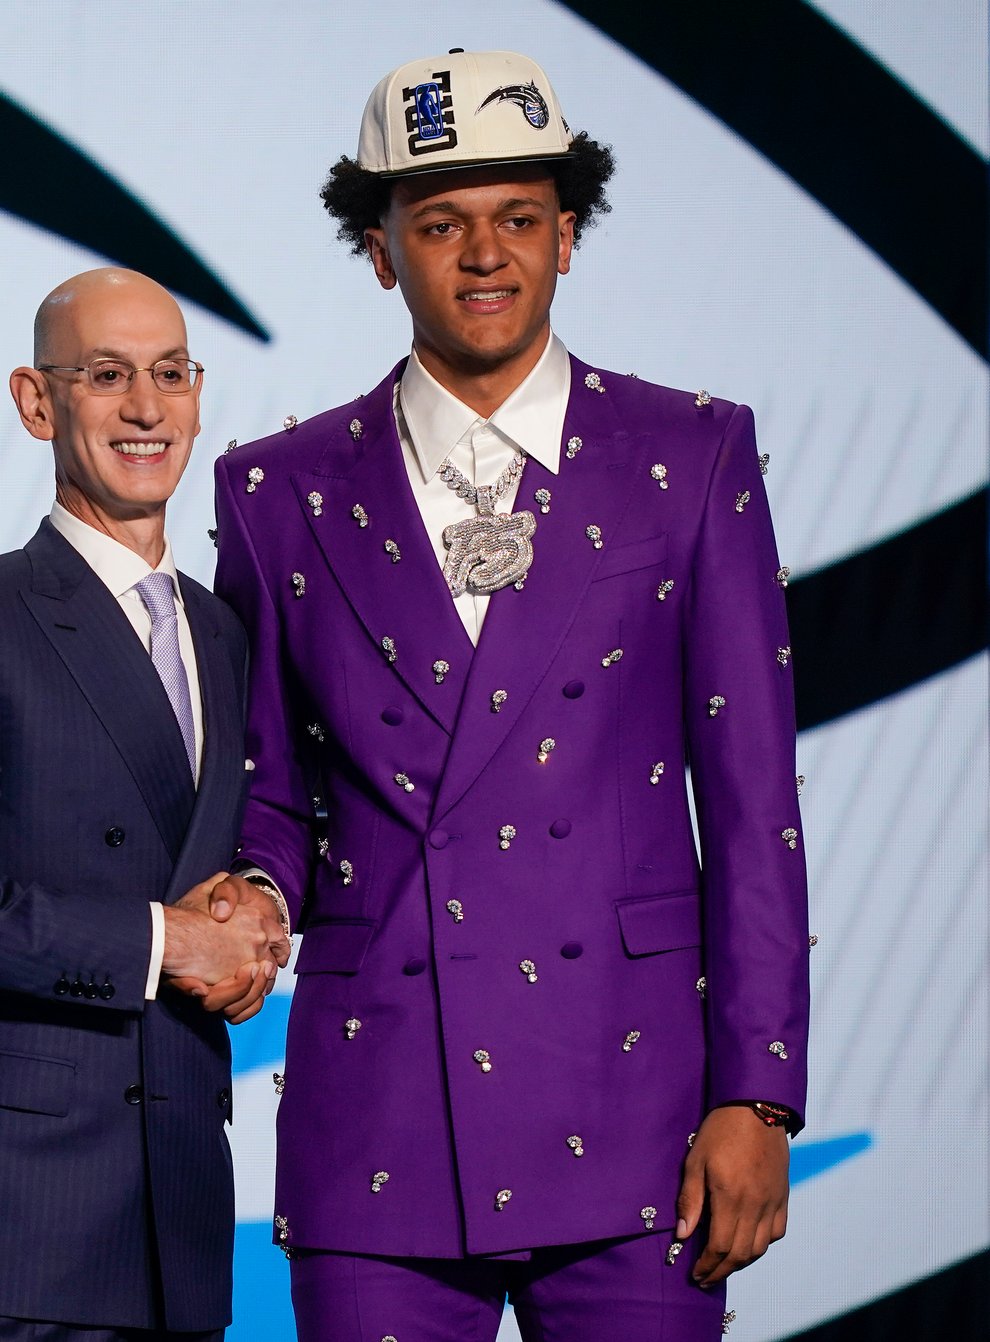 Paolo Banchero, right, with NBA commissioner Adam Silver after being selected as the number one pick overall by the Orlando Magic in the NBA Draft (John Minchillo/AP/PA)